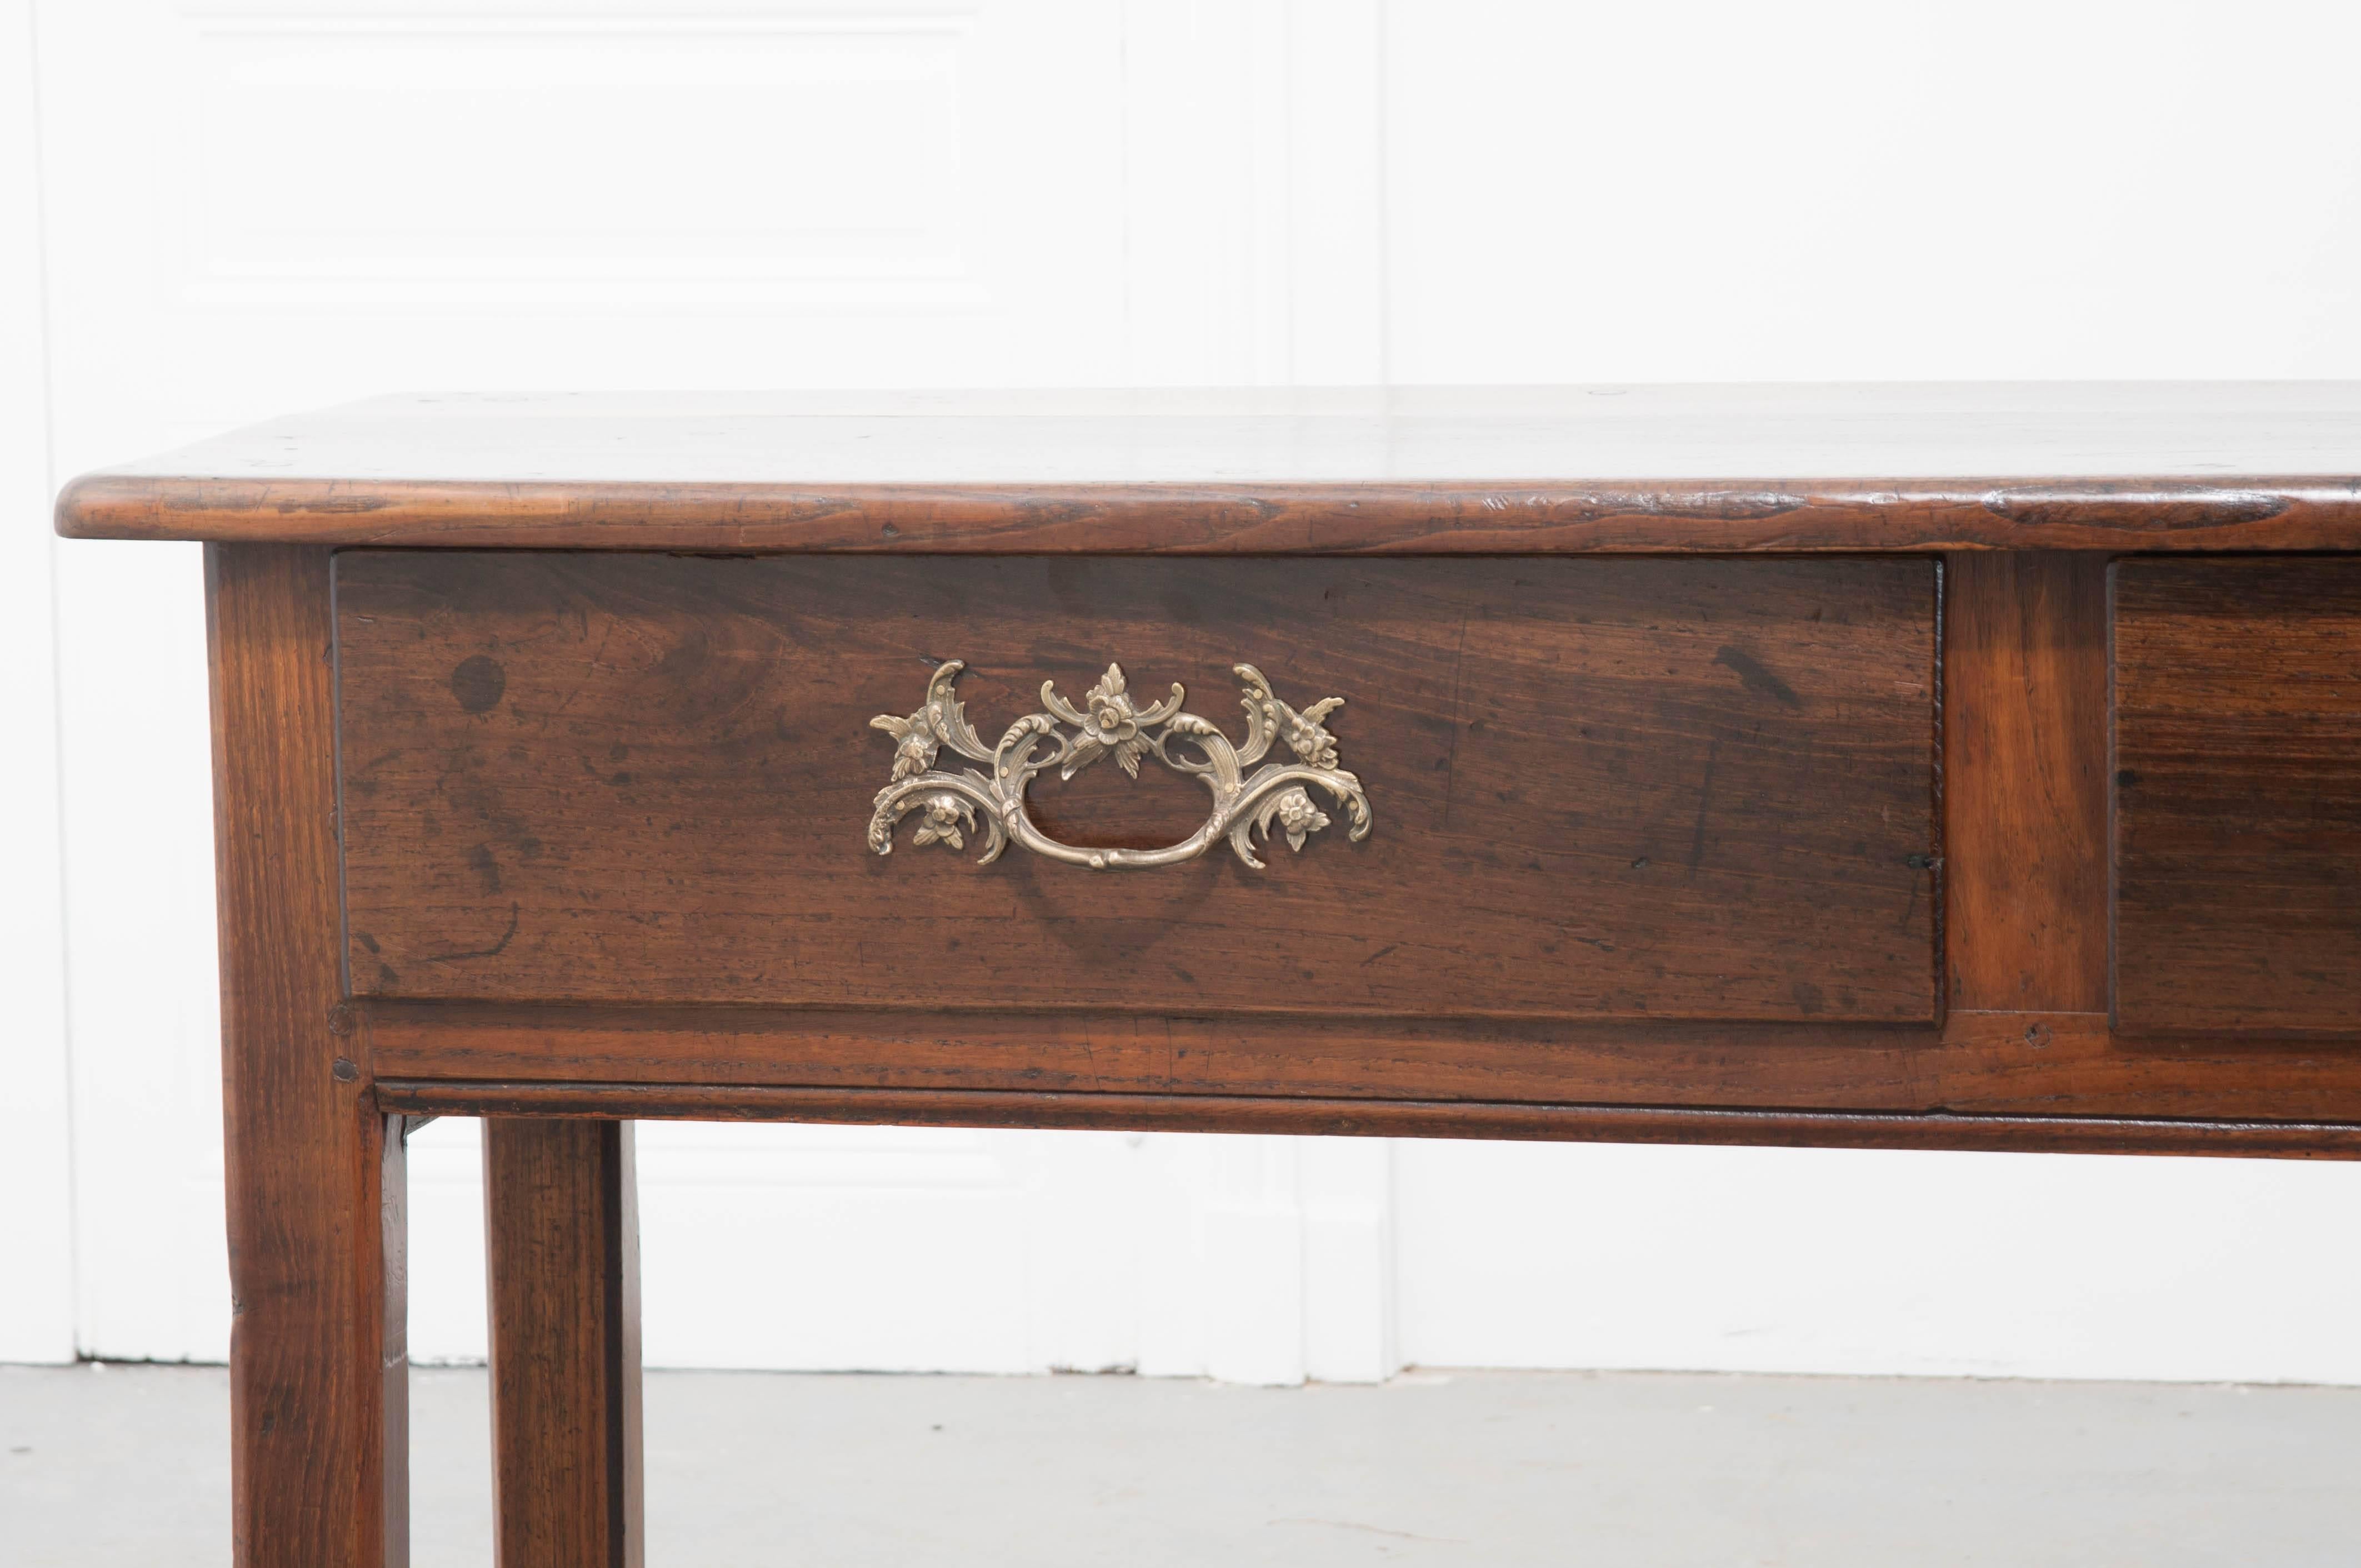 19th century English oak sideboard with three large drawers and exceptional French brass drawer pulls. This handsome, solid oak, antique English piece has rich, deep color with exceptional patina. The three drawers provide heaps of storage and are